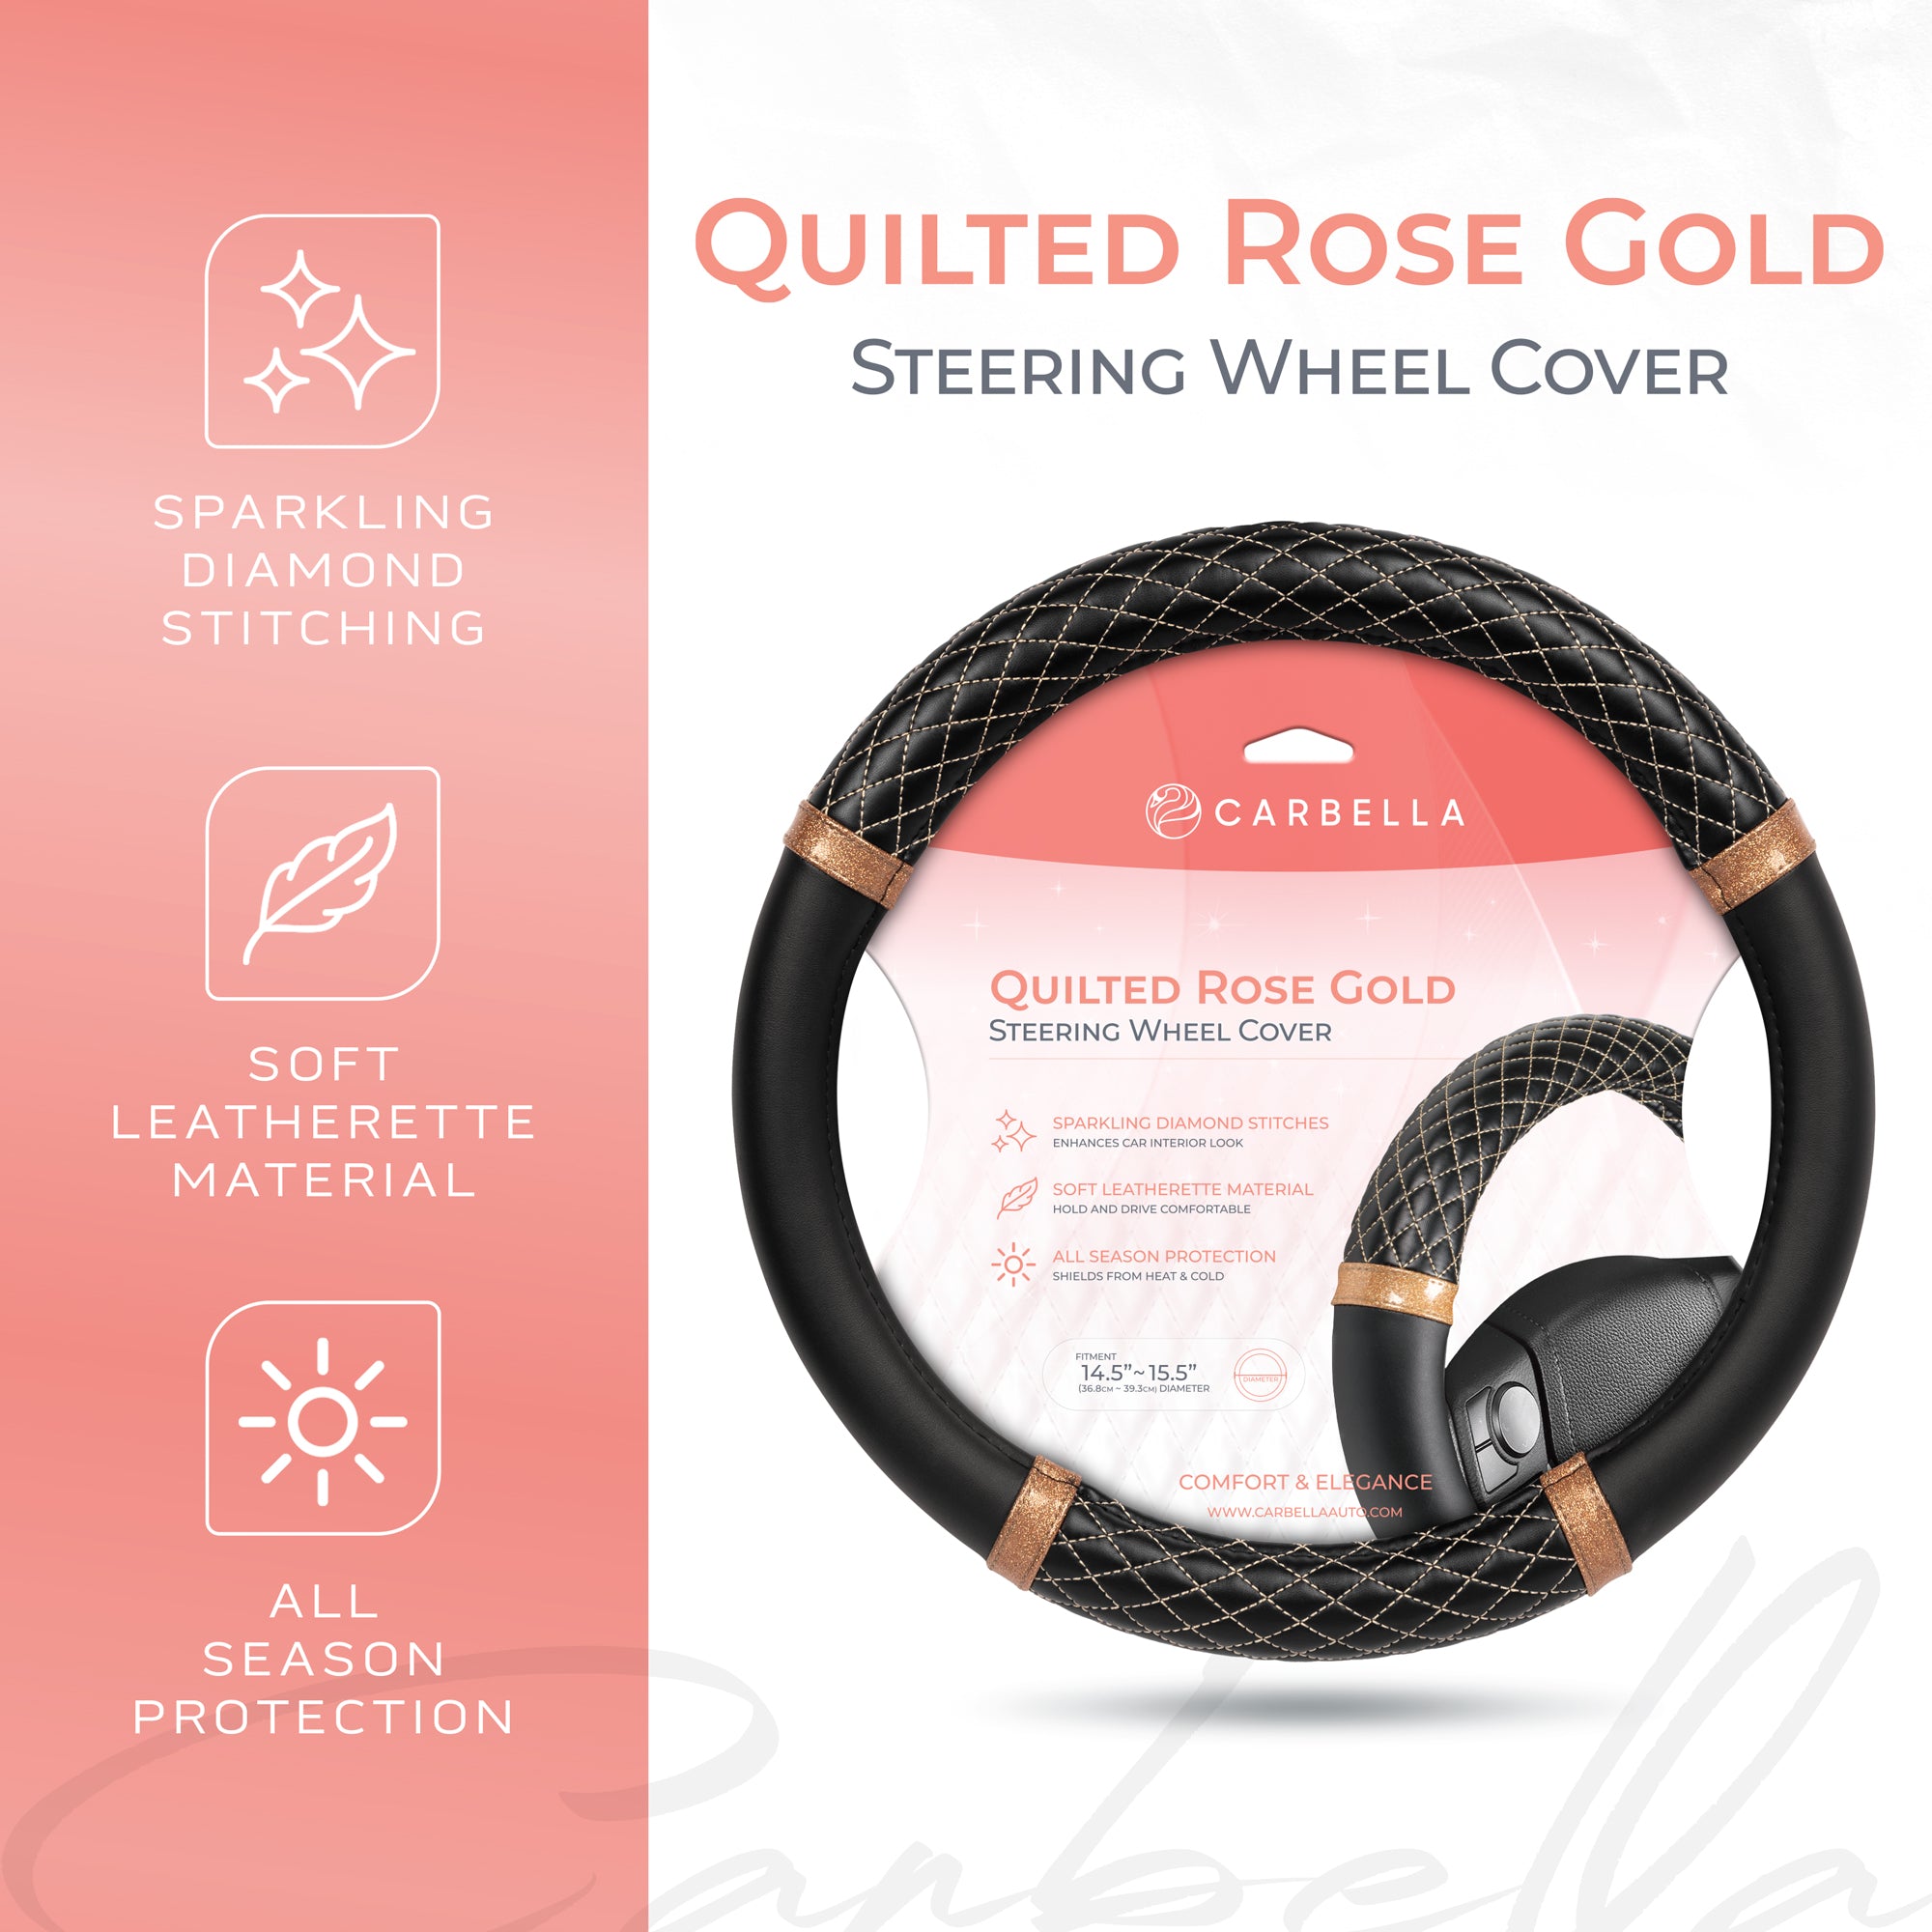 Carbella Rose Gold Quilted Steering Wheel Cover - Elegant Craft 15" Steering Cover for Cars, Trucks, SUV Accessories Accent